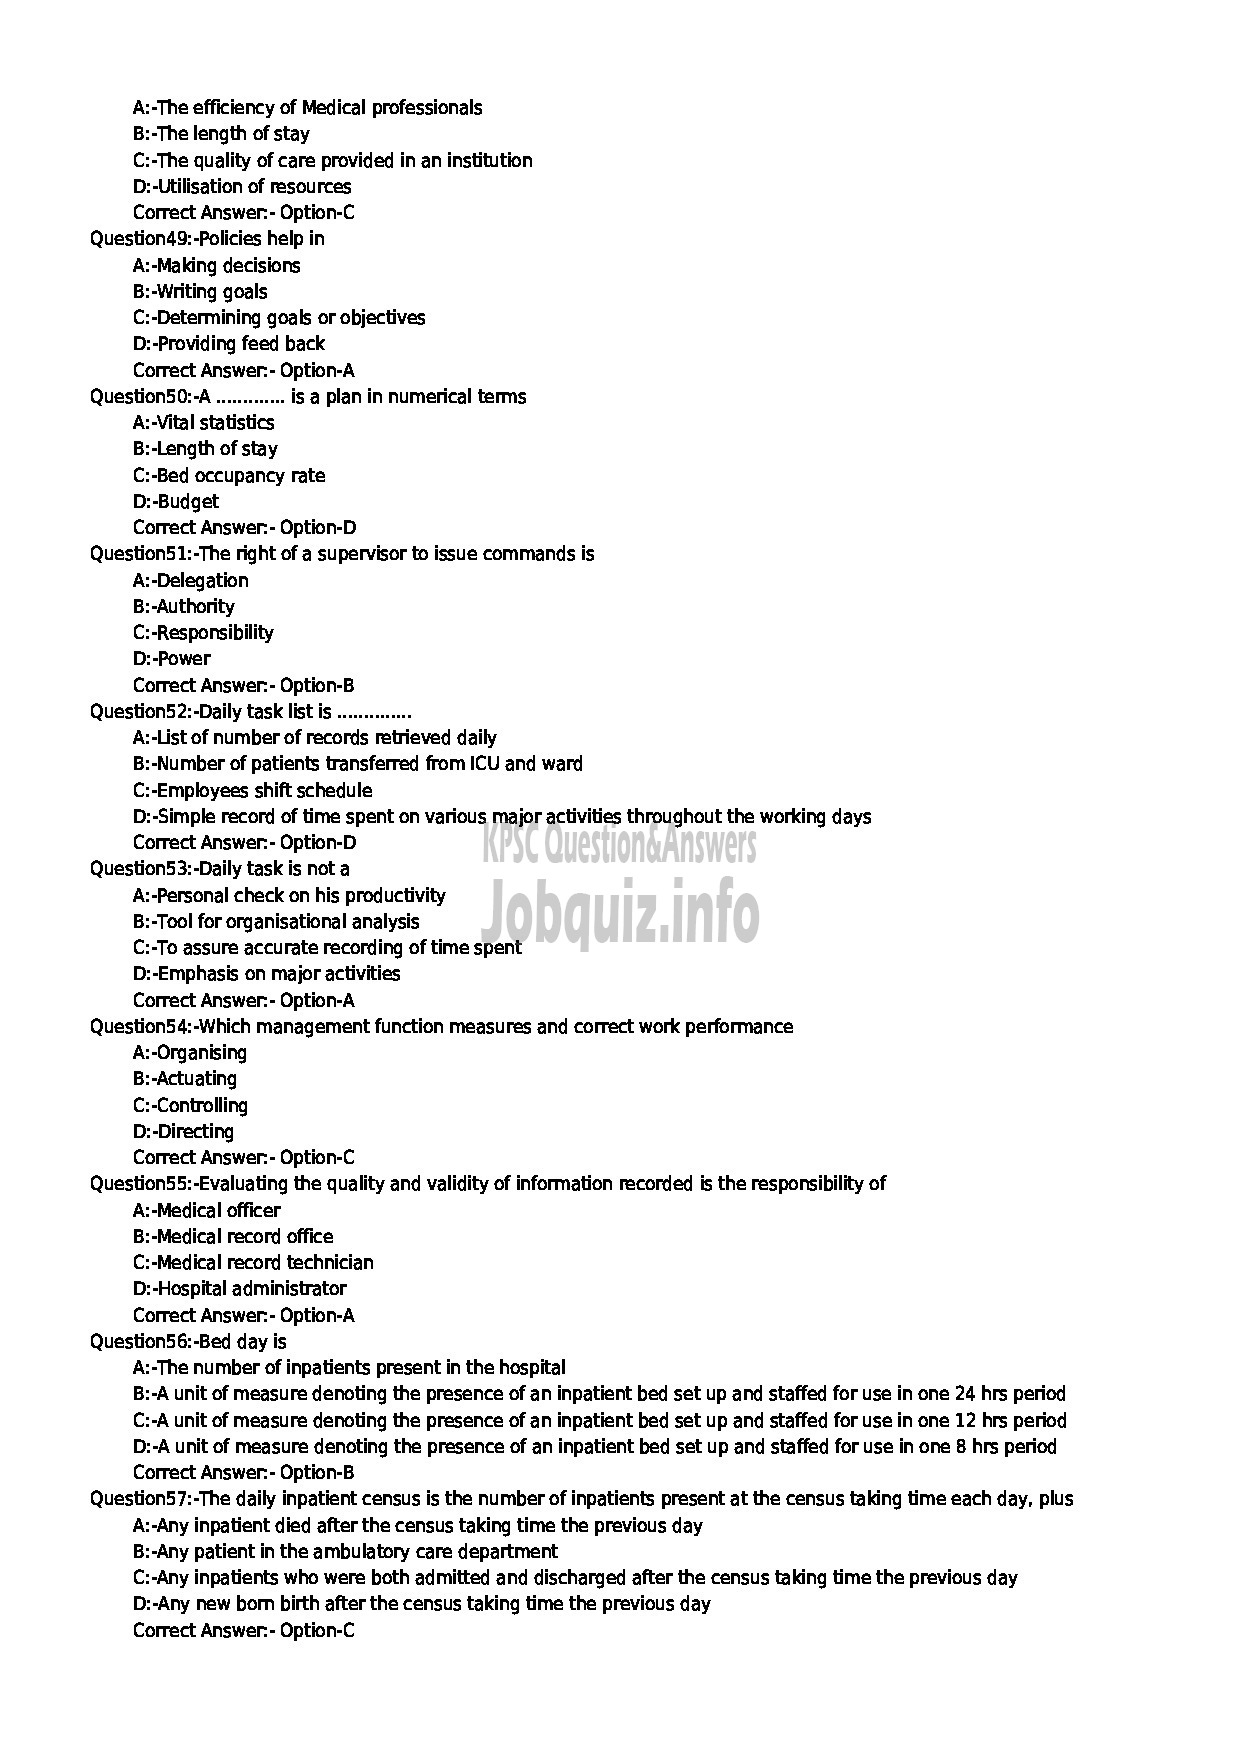 Kerala PSC Question Paper - MEDICAL RECORD LIBRARIAN GR II INSURANCE MEDICAL SERVICES-6